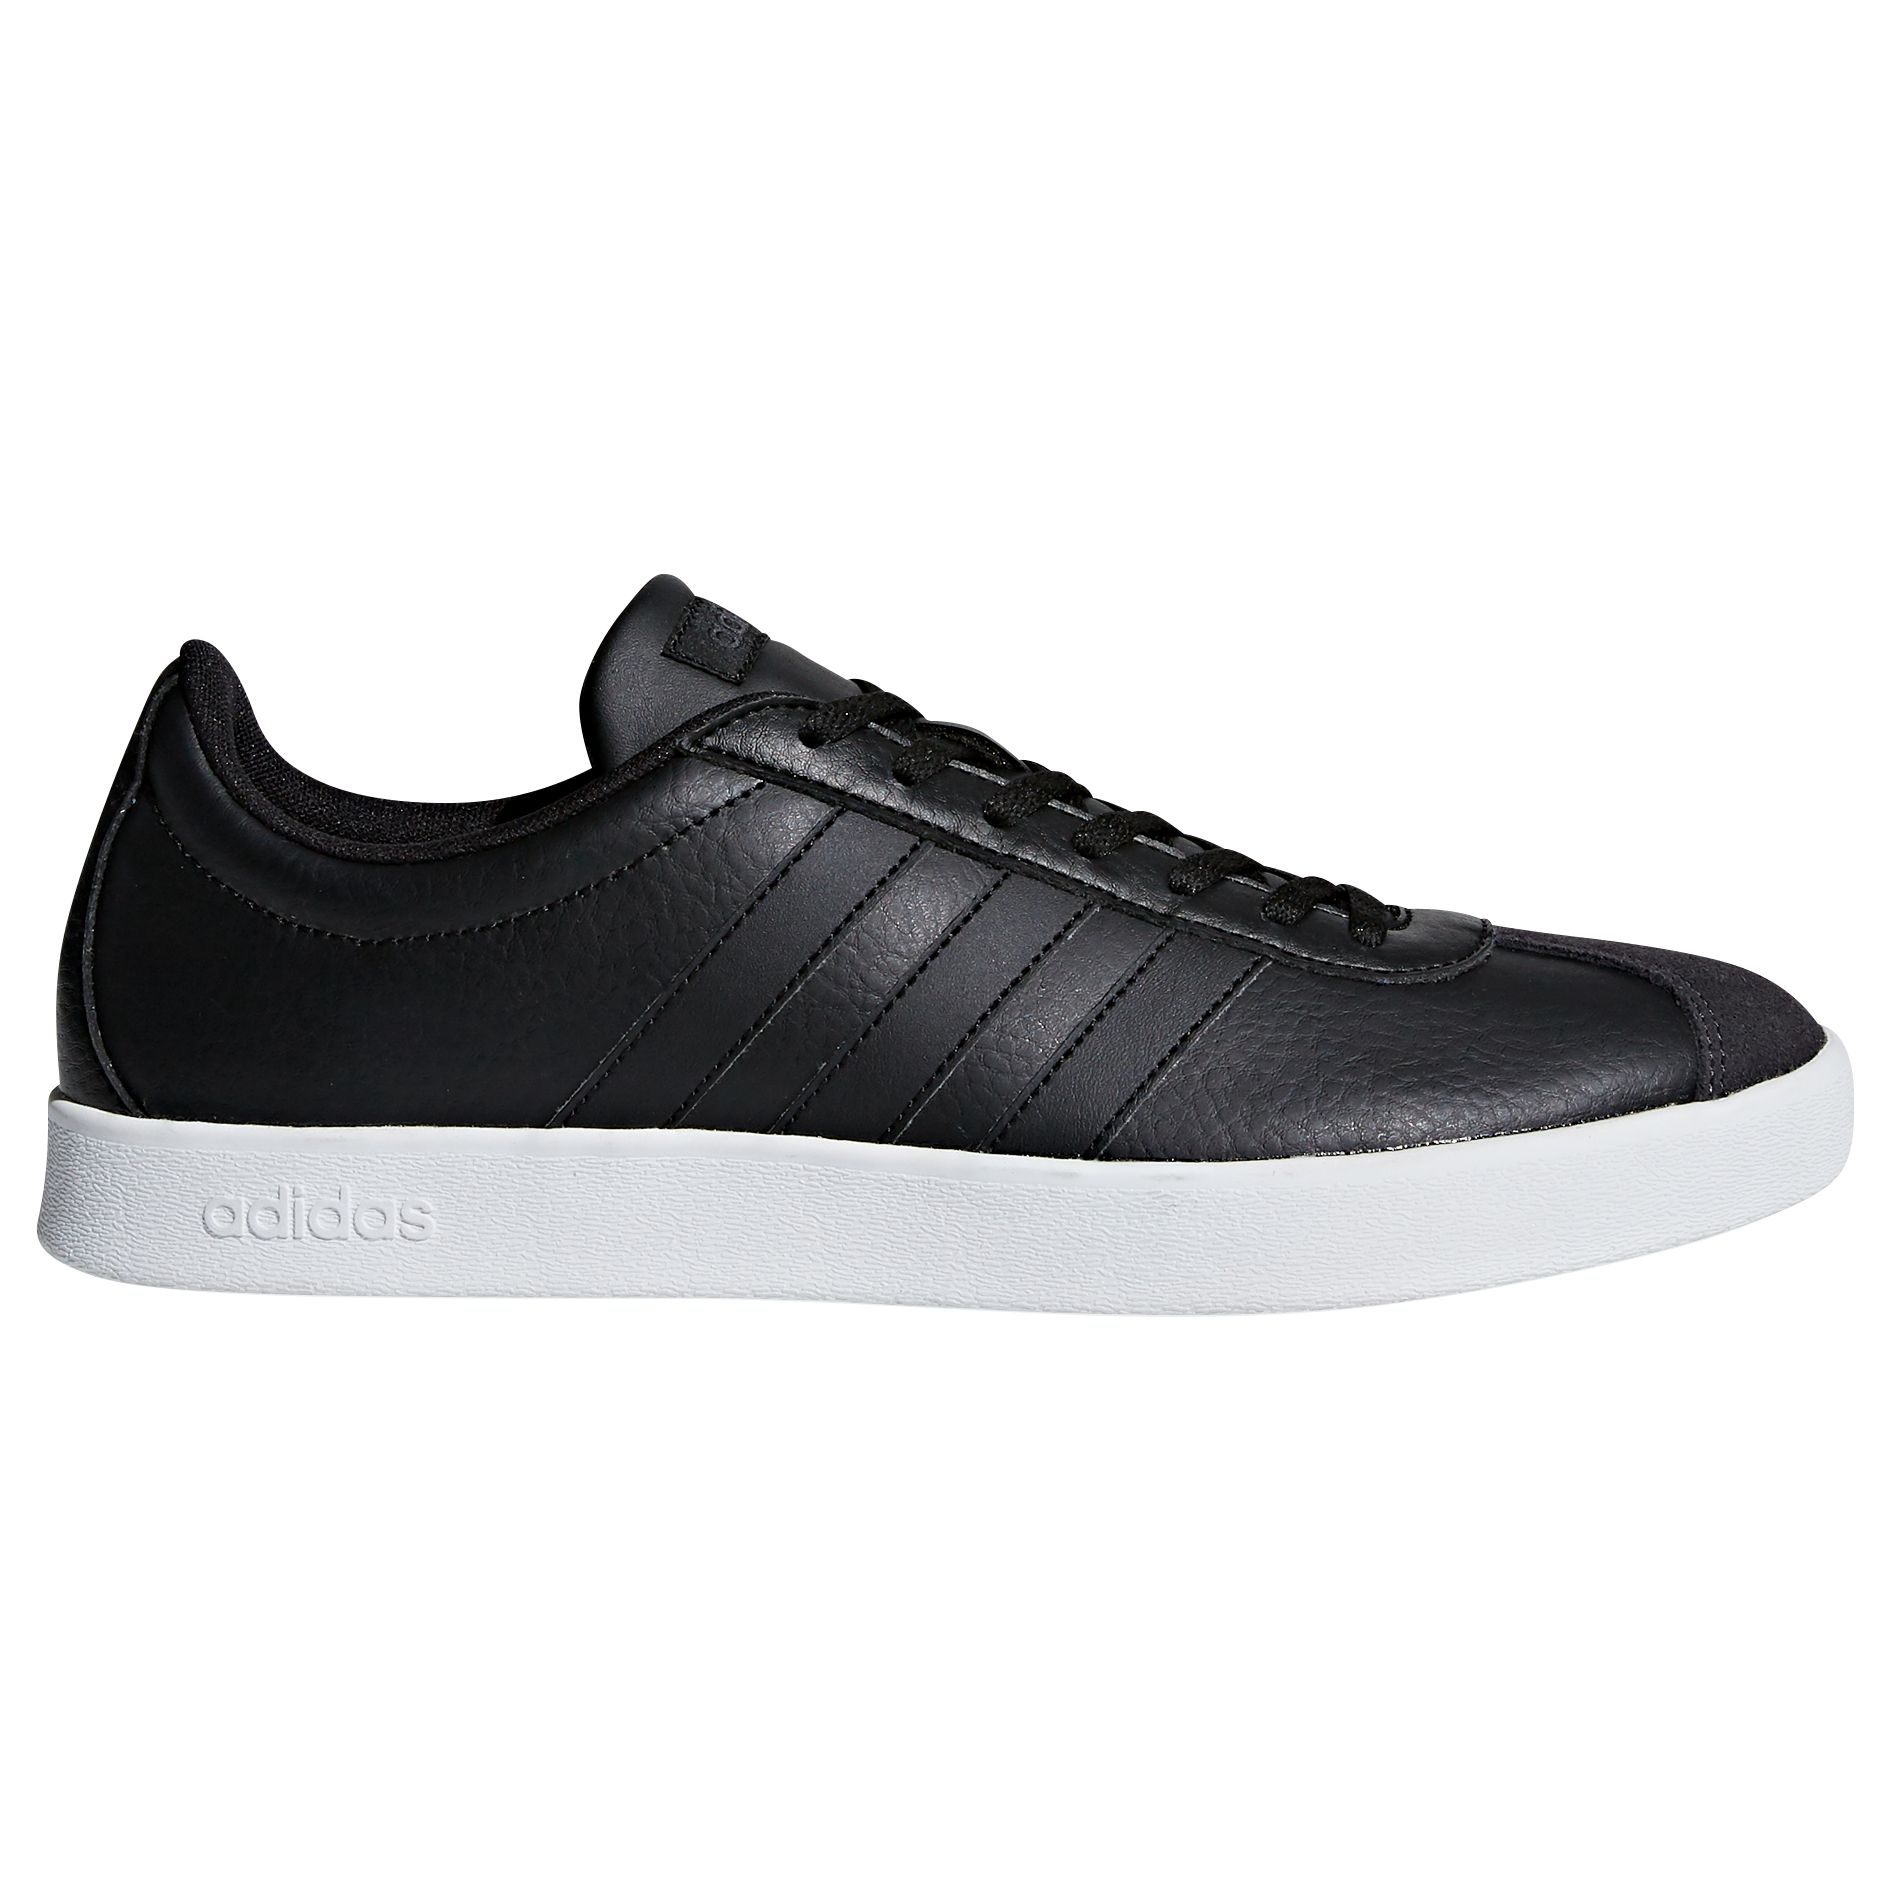 adidas mens black leather trainers